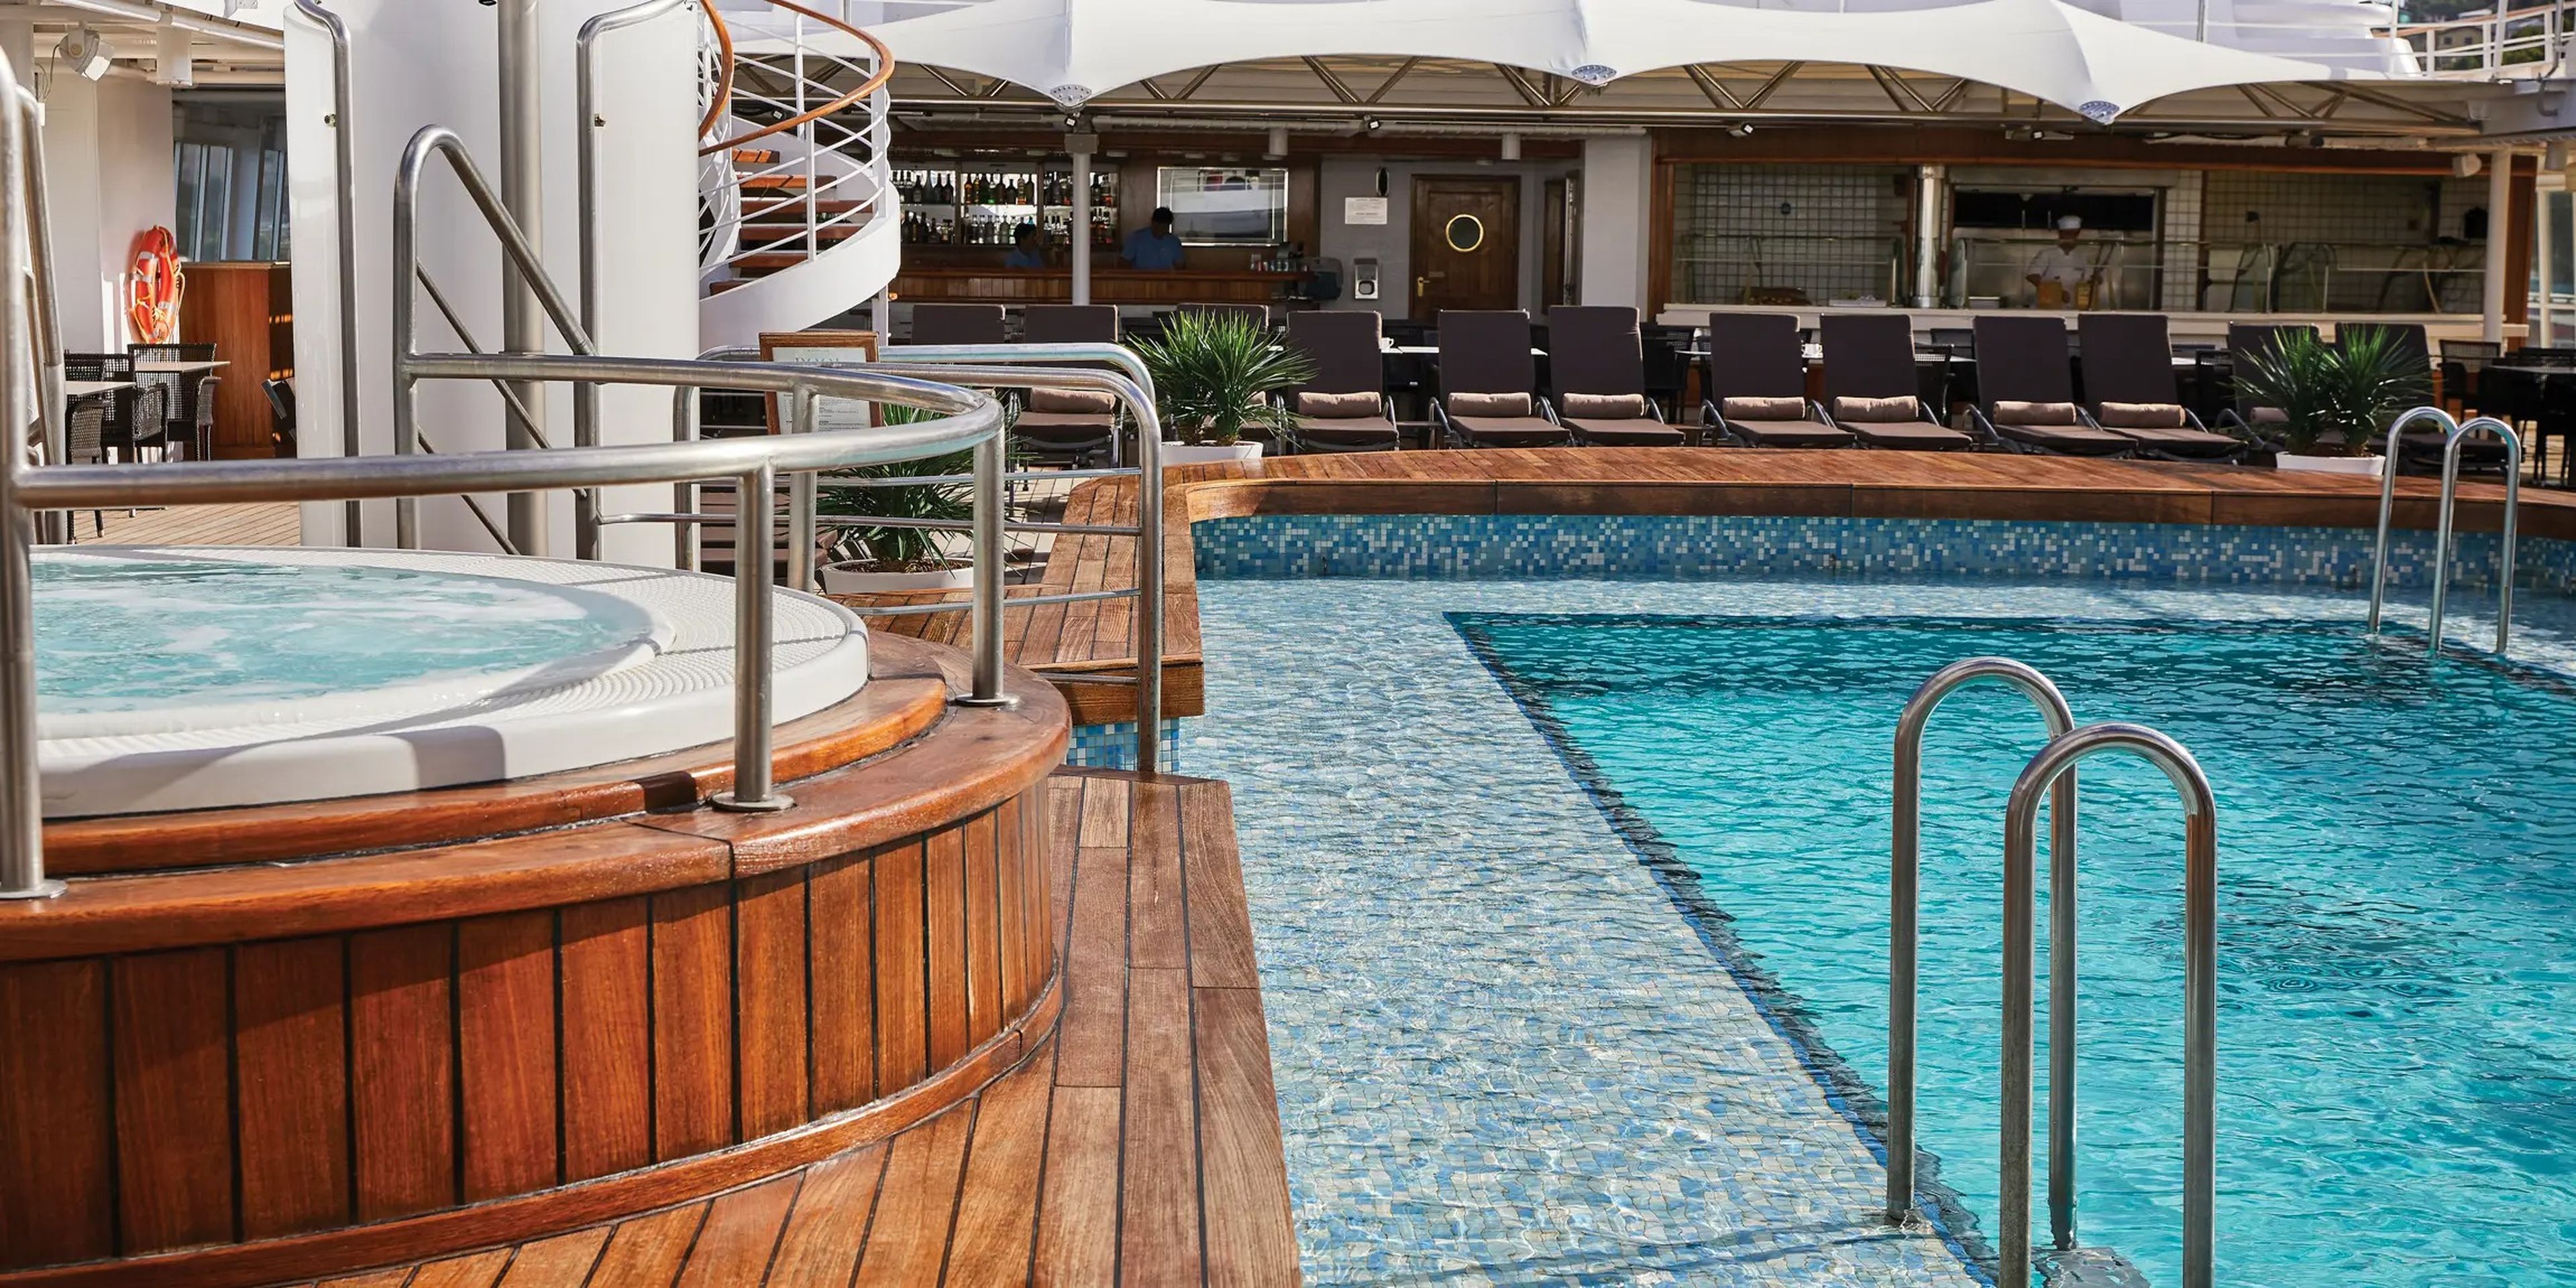 The pool deck of the Silver Wind